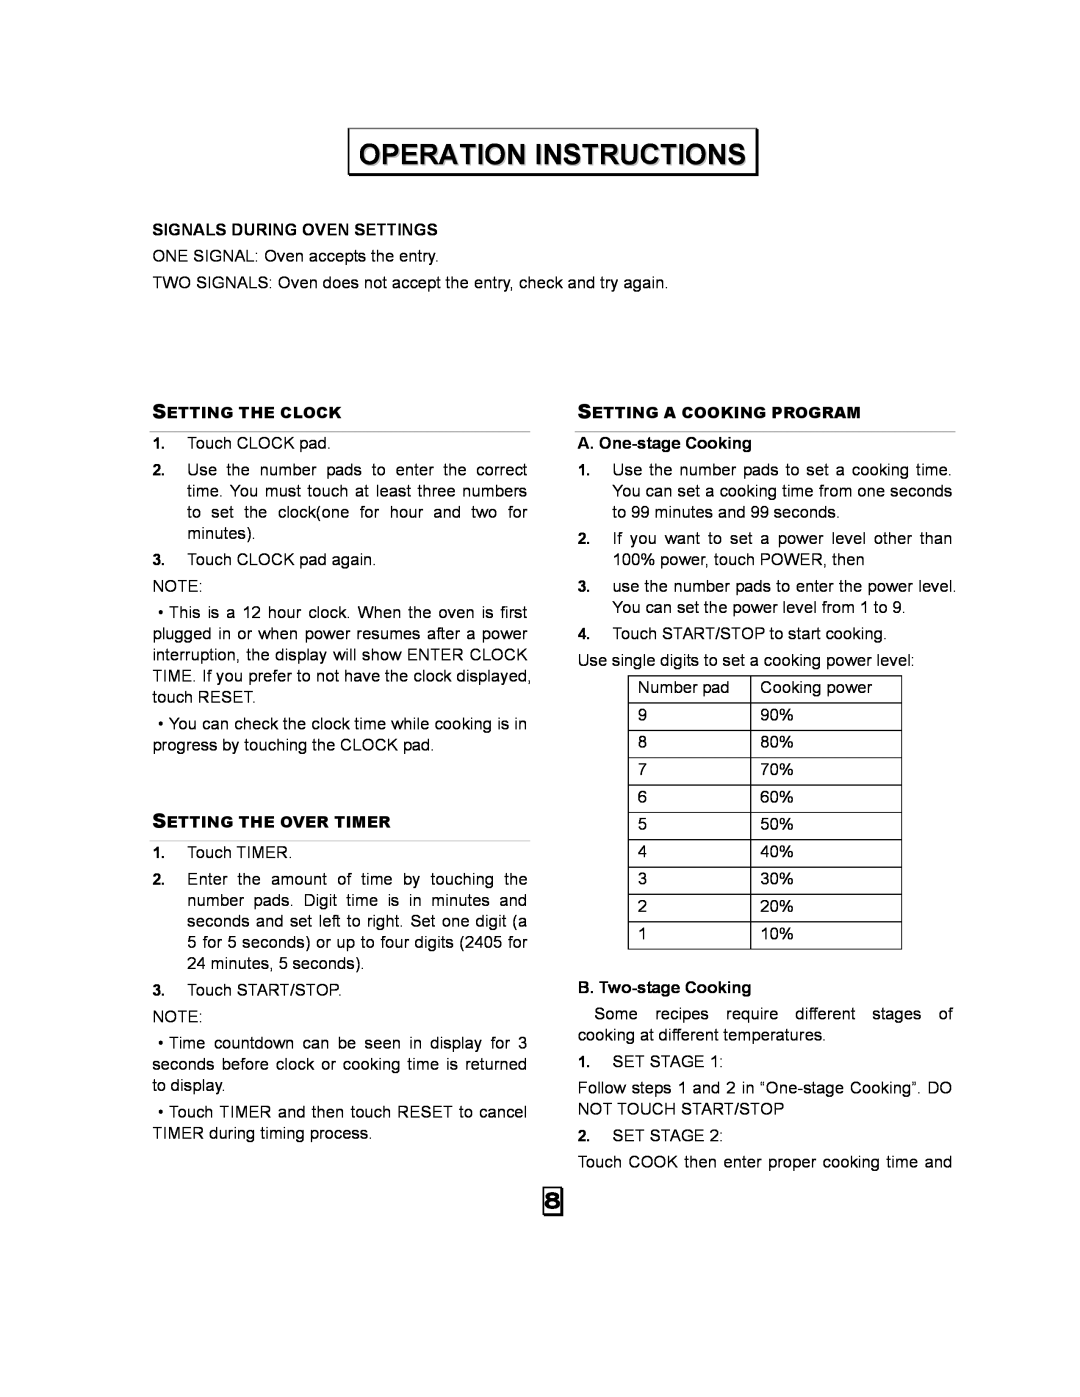 Kenmore 87090 owner manual Operation Instructions, Signals During Oven Settings, A. One-stageCooking, B. Two-stageCooking 